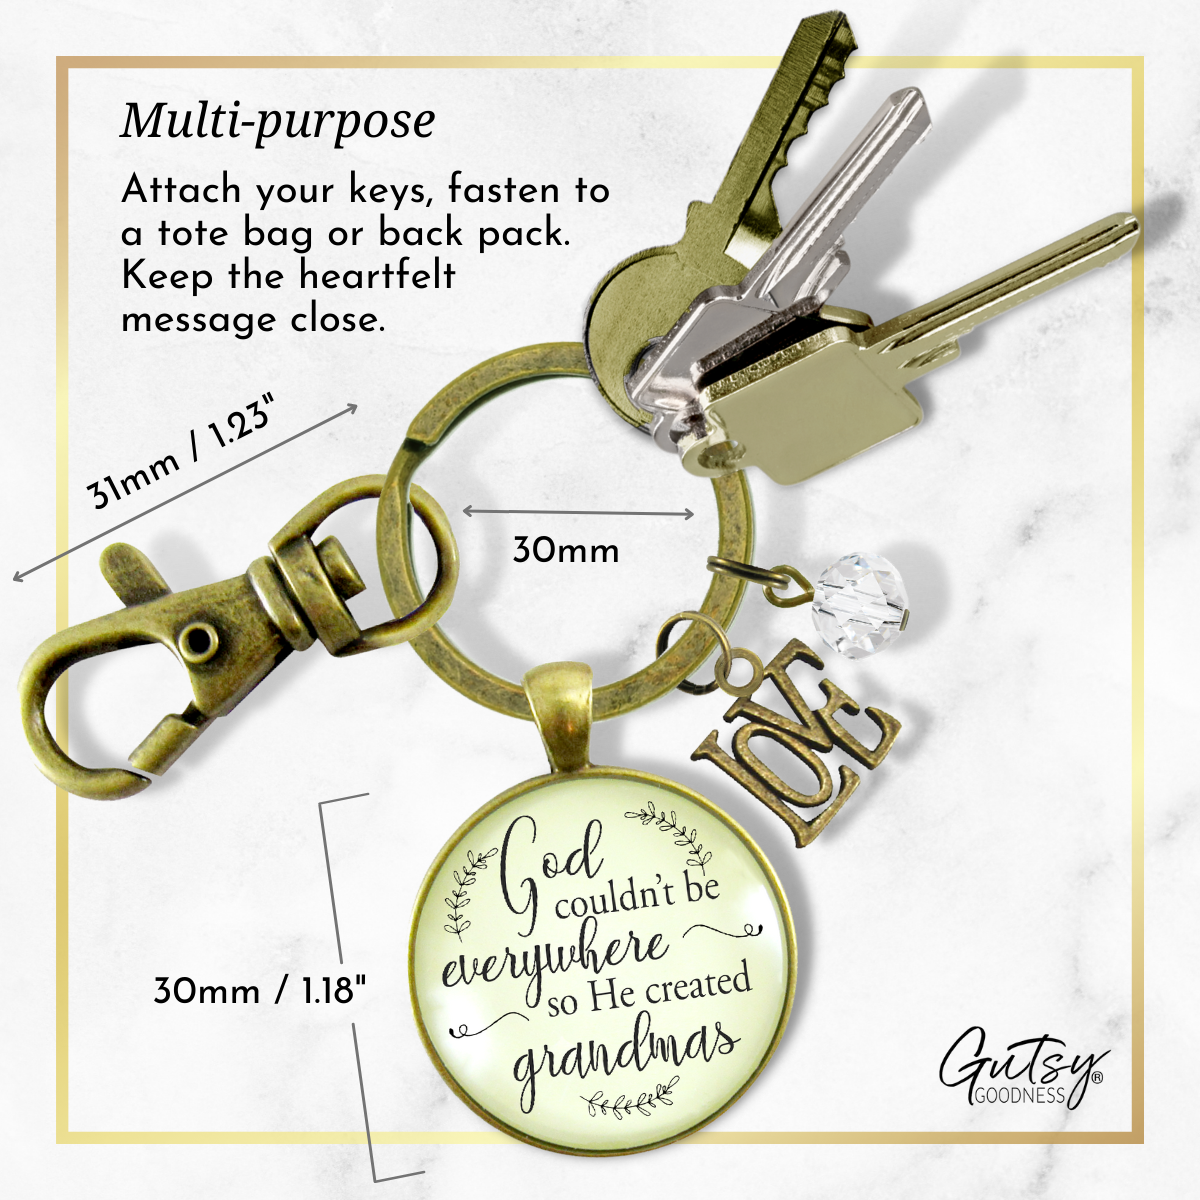 Blessed Grandma Keychain God Couldn't Be Everywhere Christian Family Jewelry Gift - Gutsy Goodness Handmade Jewelry;Blessed Grandma Keychain God Couldn't Be Everywhere Christian Family Jewelry Gift - Gutsy Goodness Handmade Jewelry Gifts